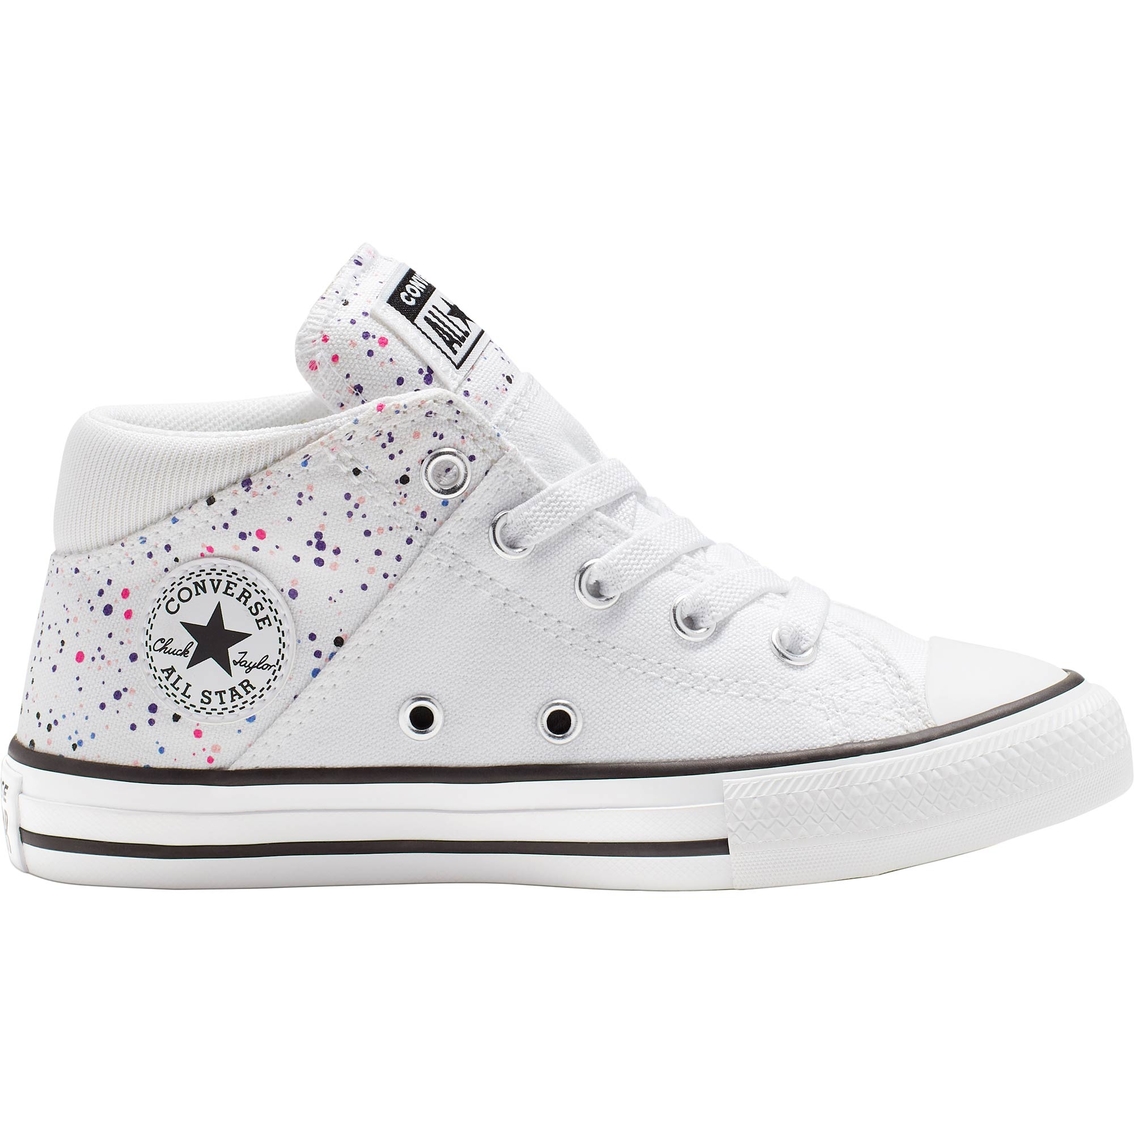 Converse Girls Chuck Taylor All Star Madison Mid PG Shoes - Image 2 of 3